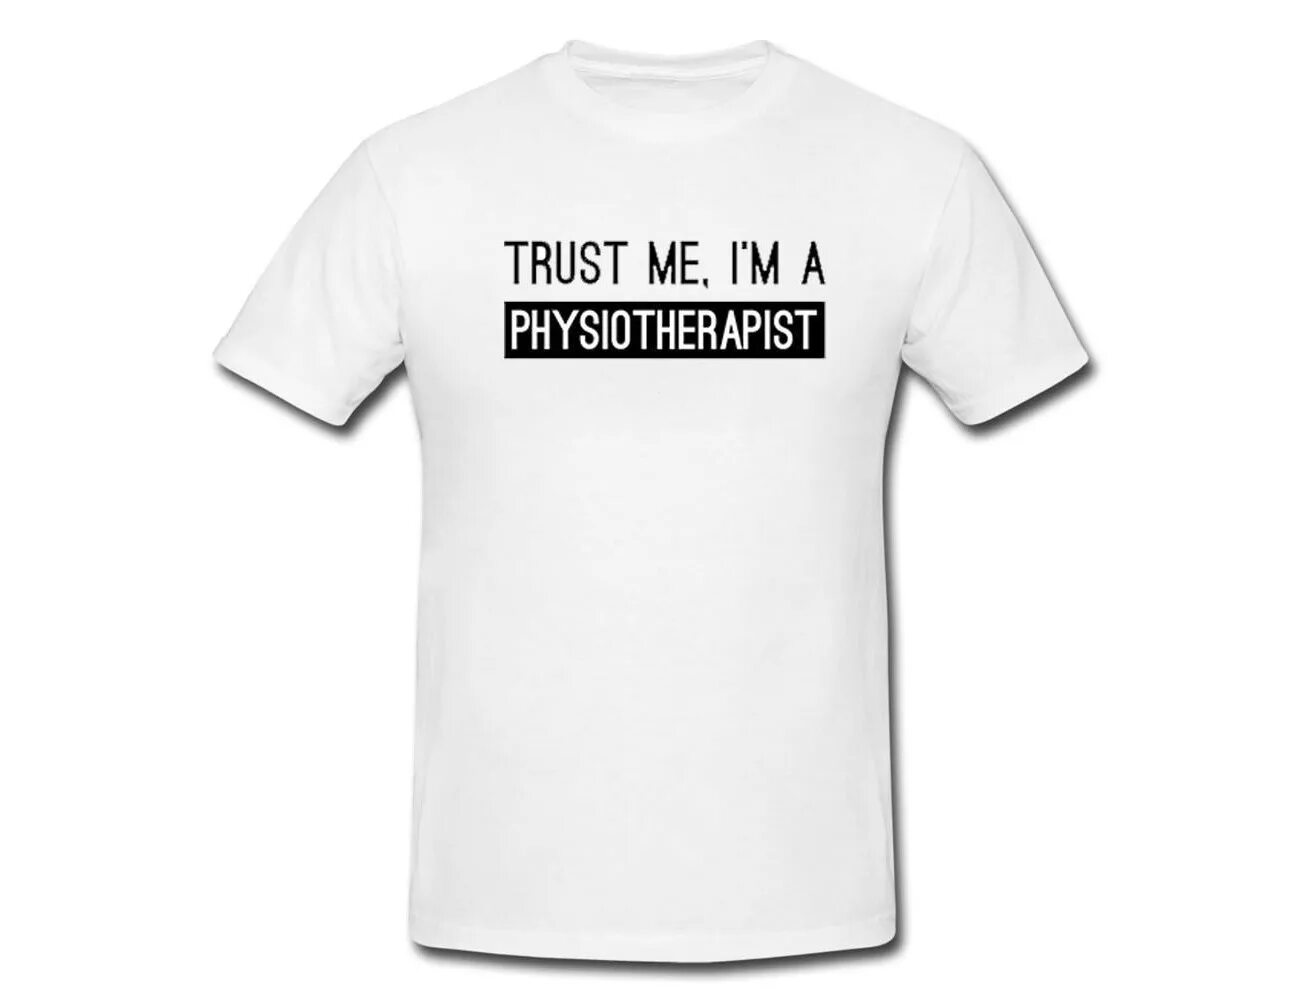 Trust me i'm Physiotherapist. Футболка Trust me i'm a Doctor на ВБ. Футболка Trust me i'm a girl. Футболка no risk no fun. Do you really trust me